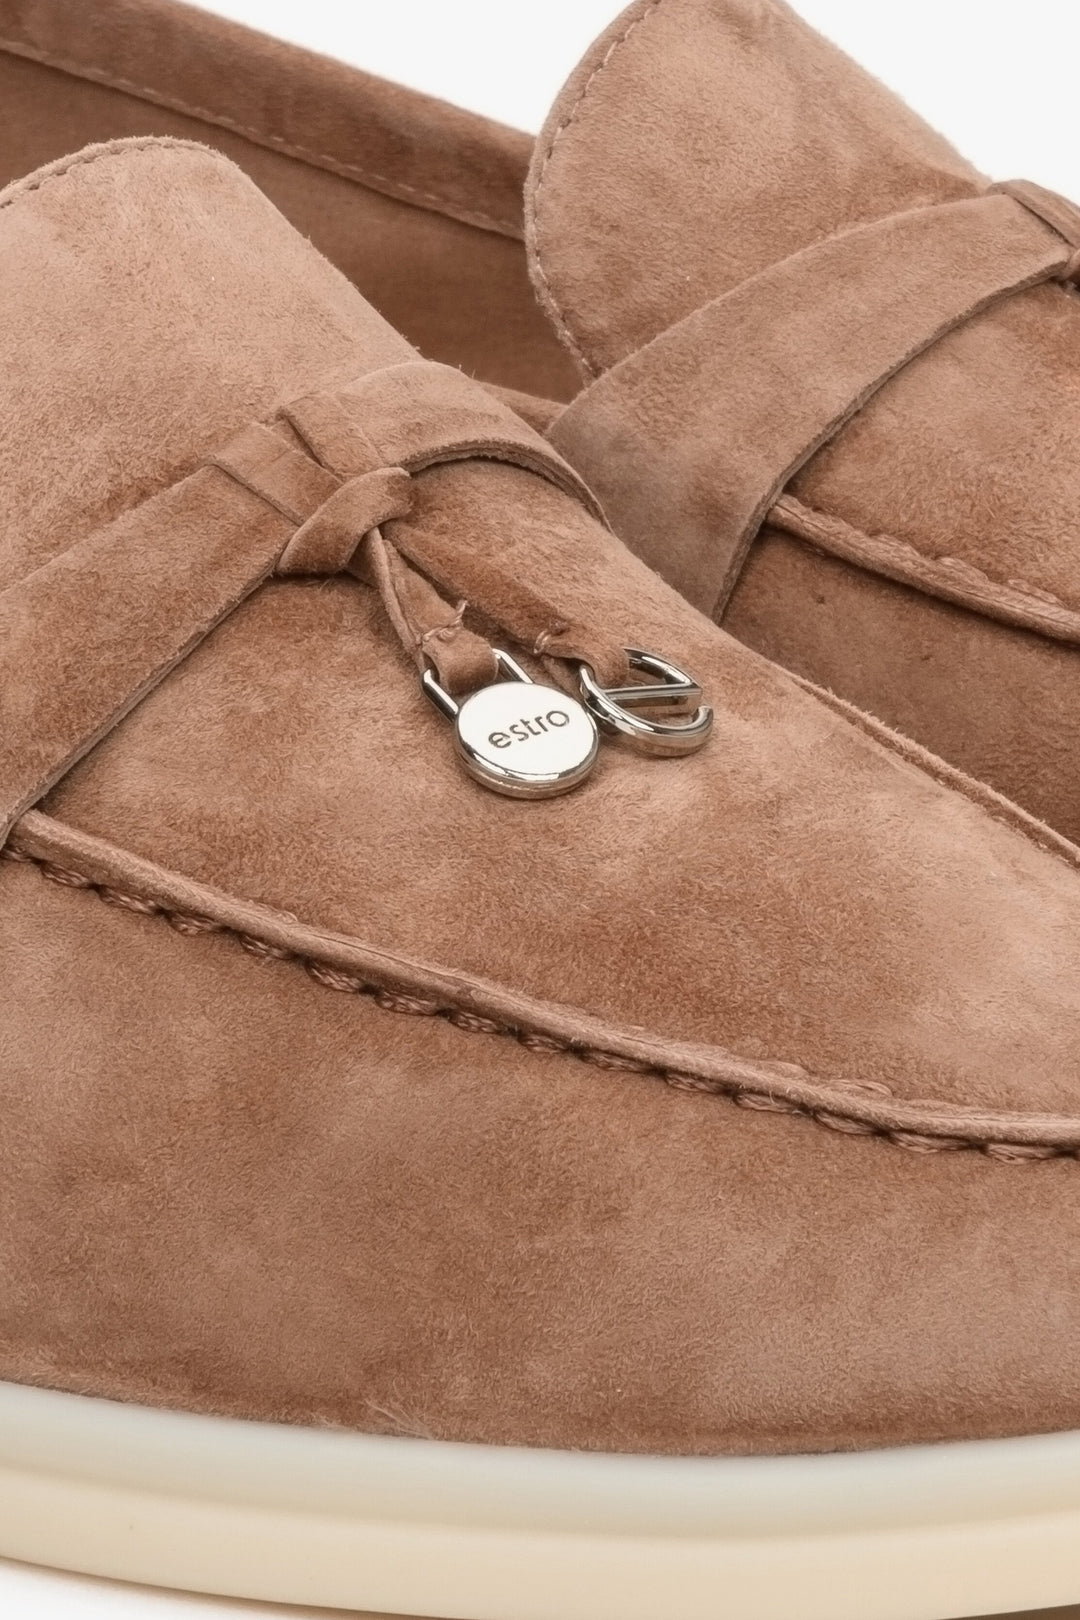 Brown comfy and elegant women's velour loafers - close-up on details.